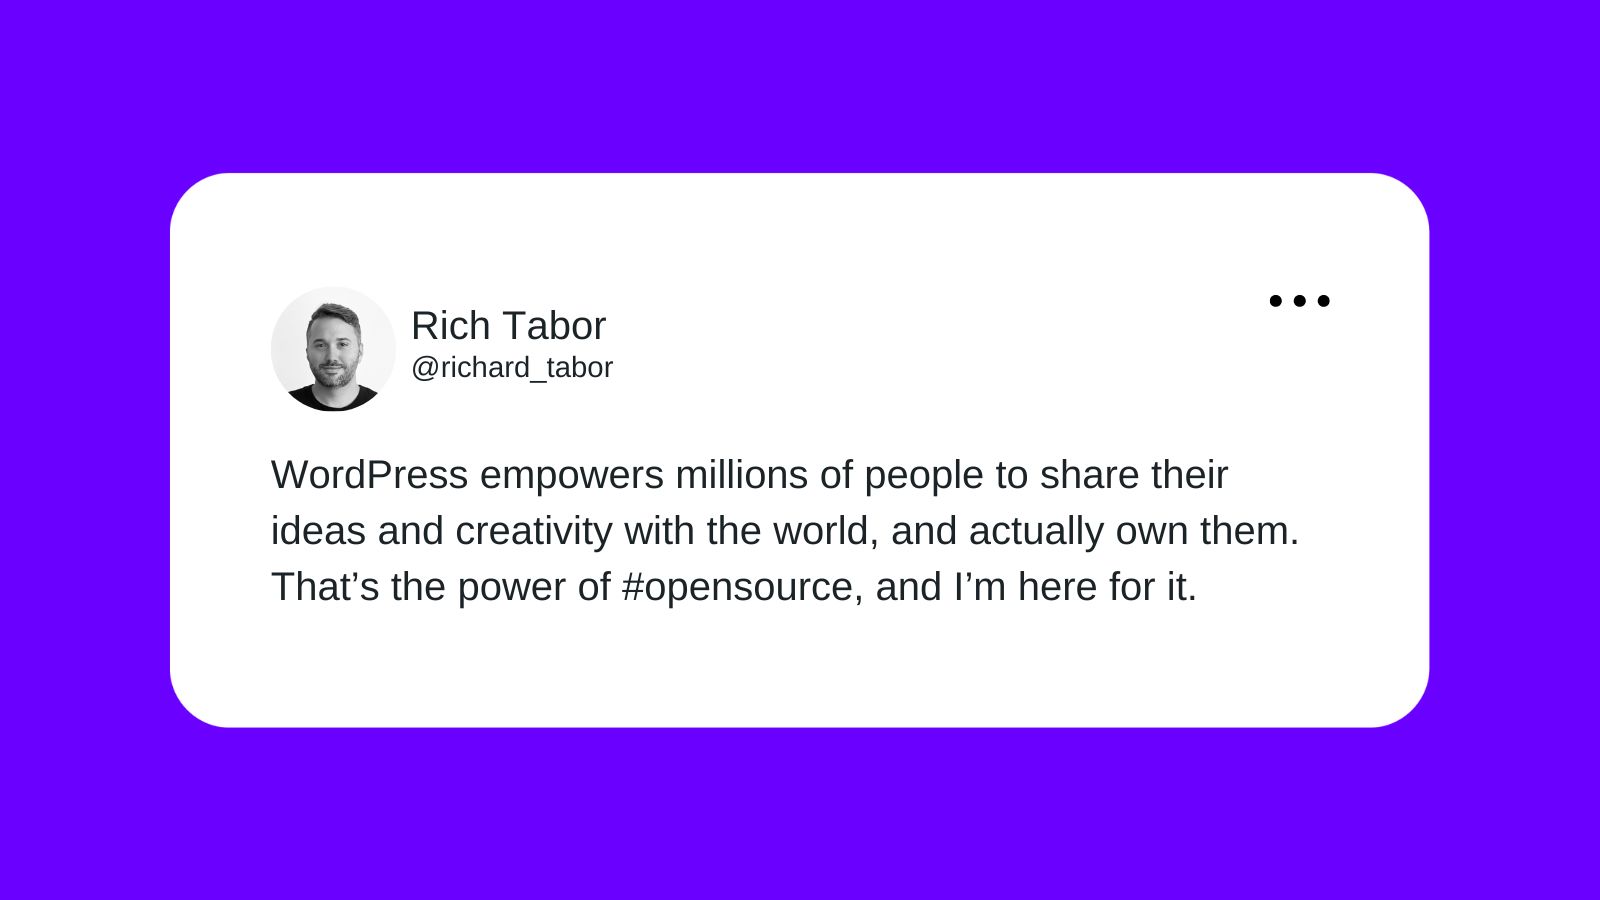 Rich Tabor tweeting "WordPress empowers millions of people to share their ideas and creativity with the world, and actually own them. That's the power of #opensource, and I'm here for it."